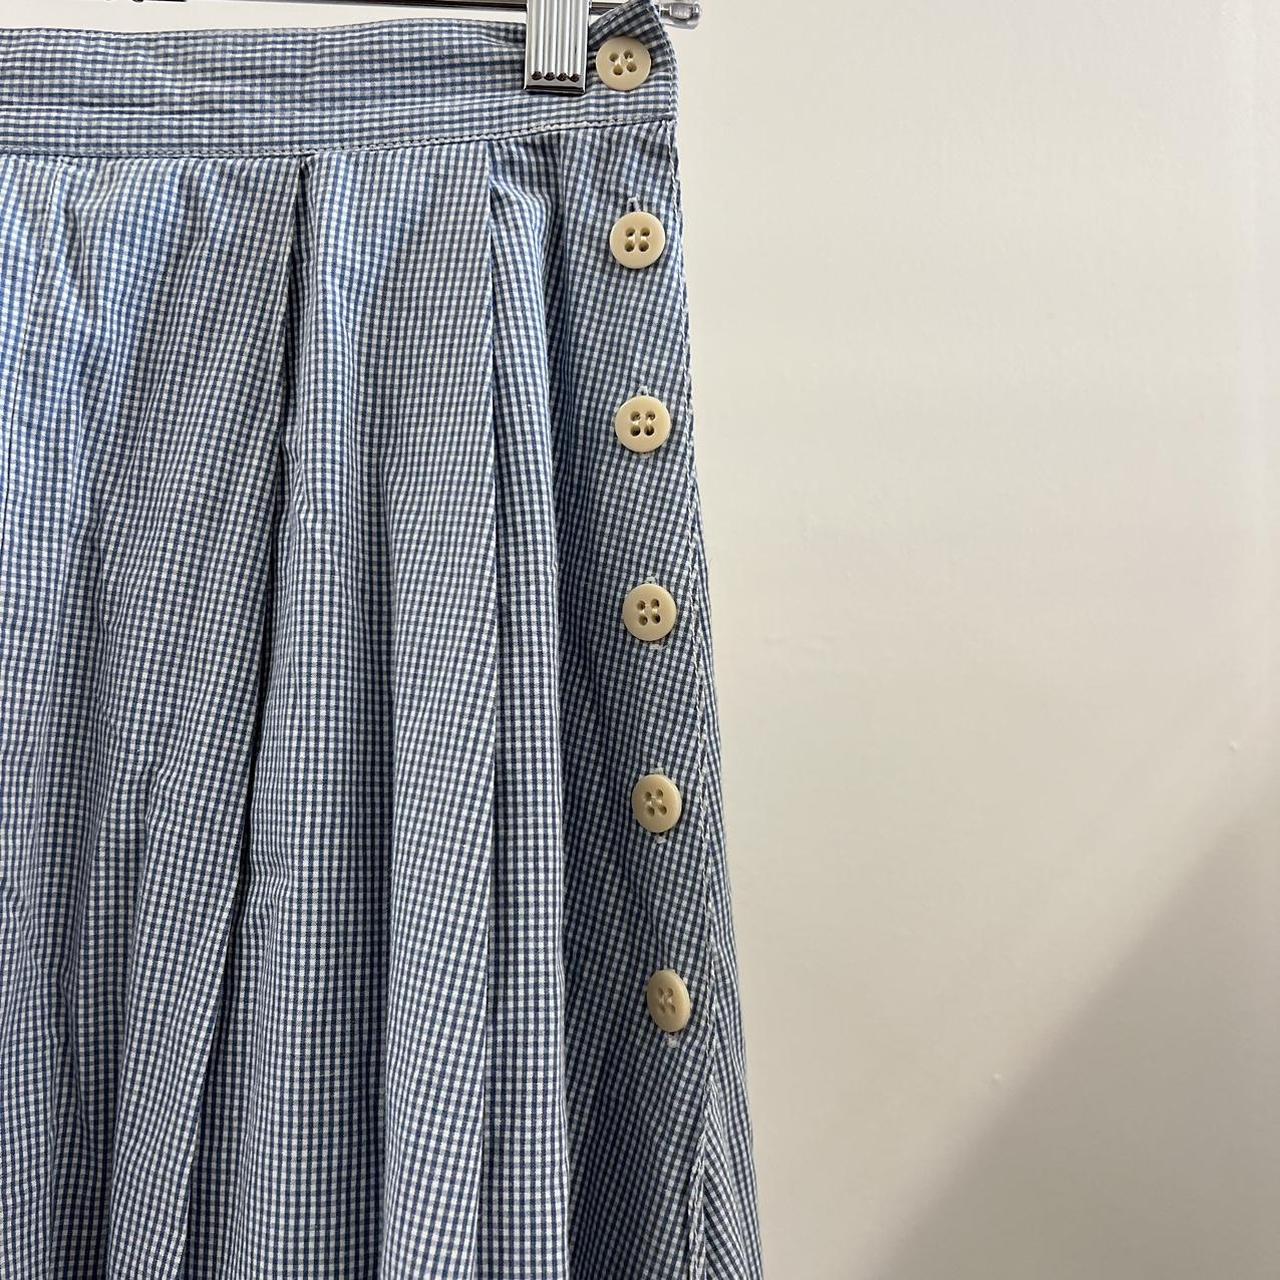 Armani Jeans Women's White and Blue Skirt (4)